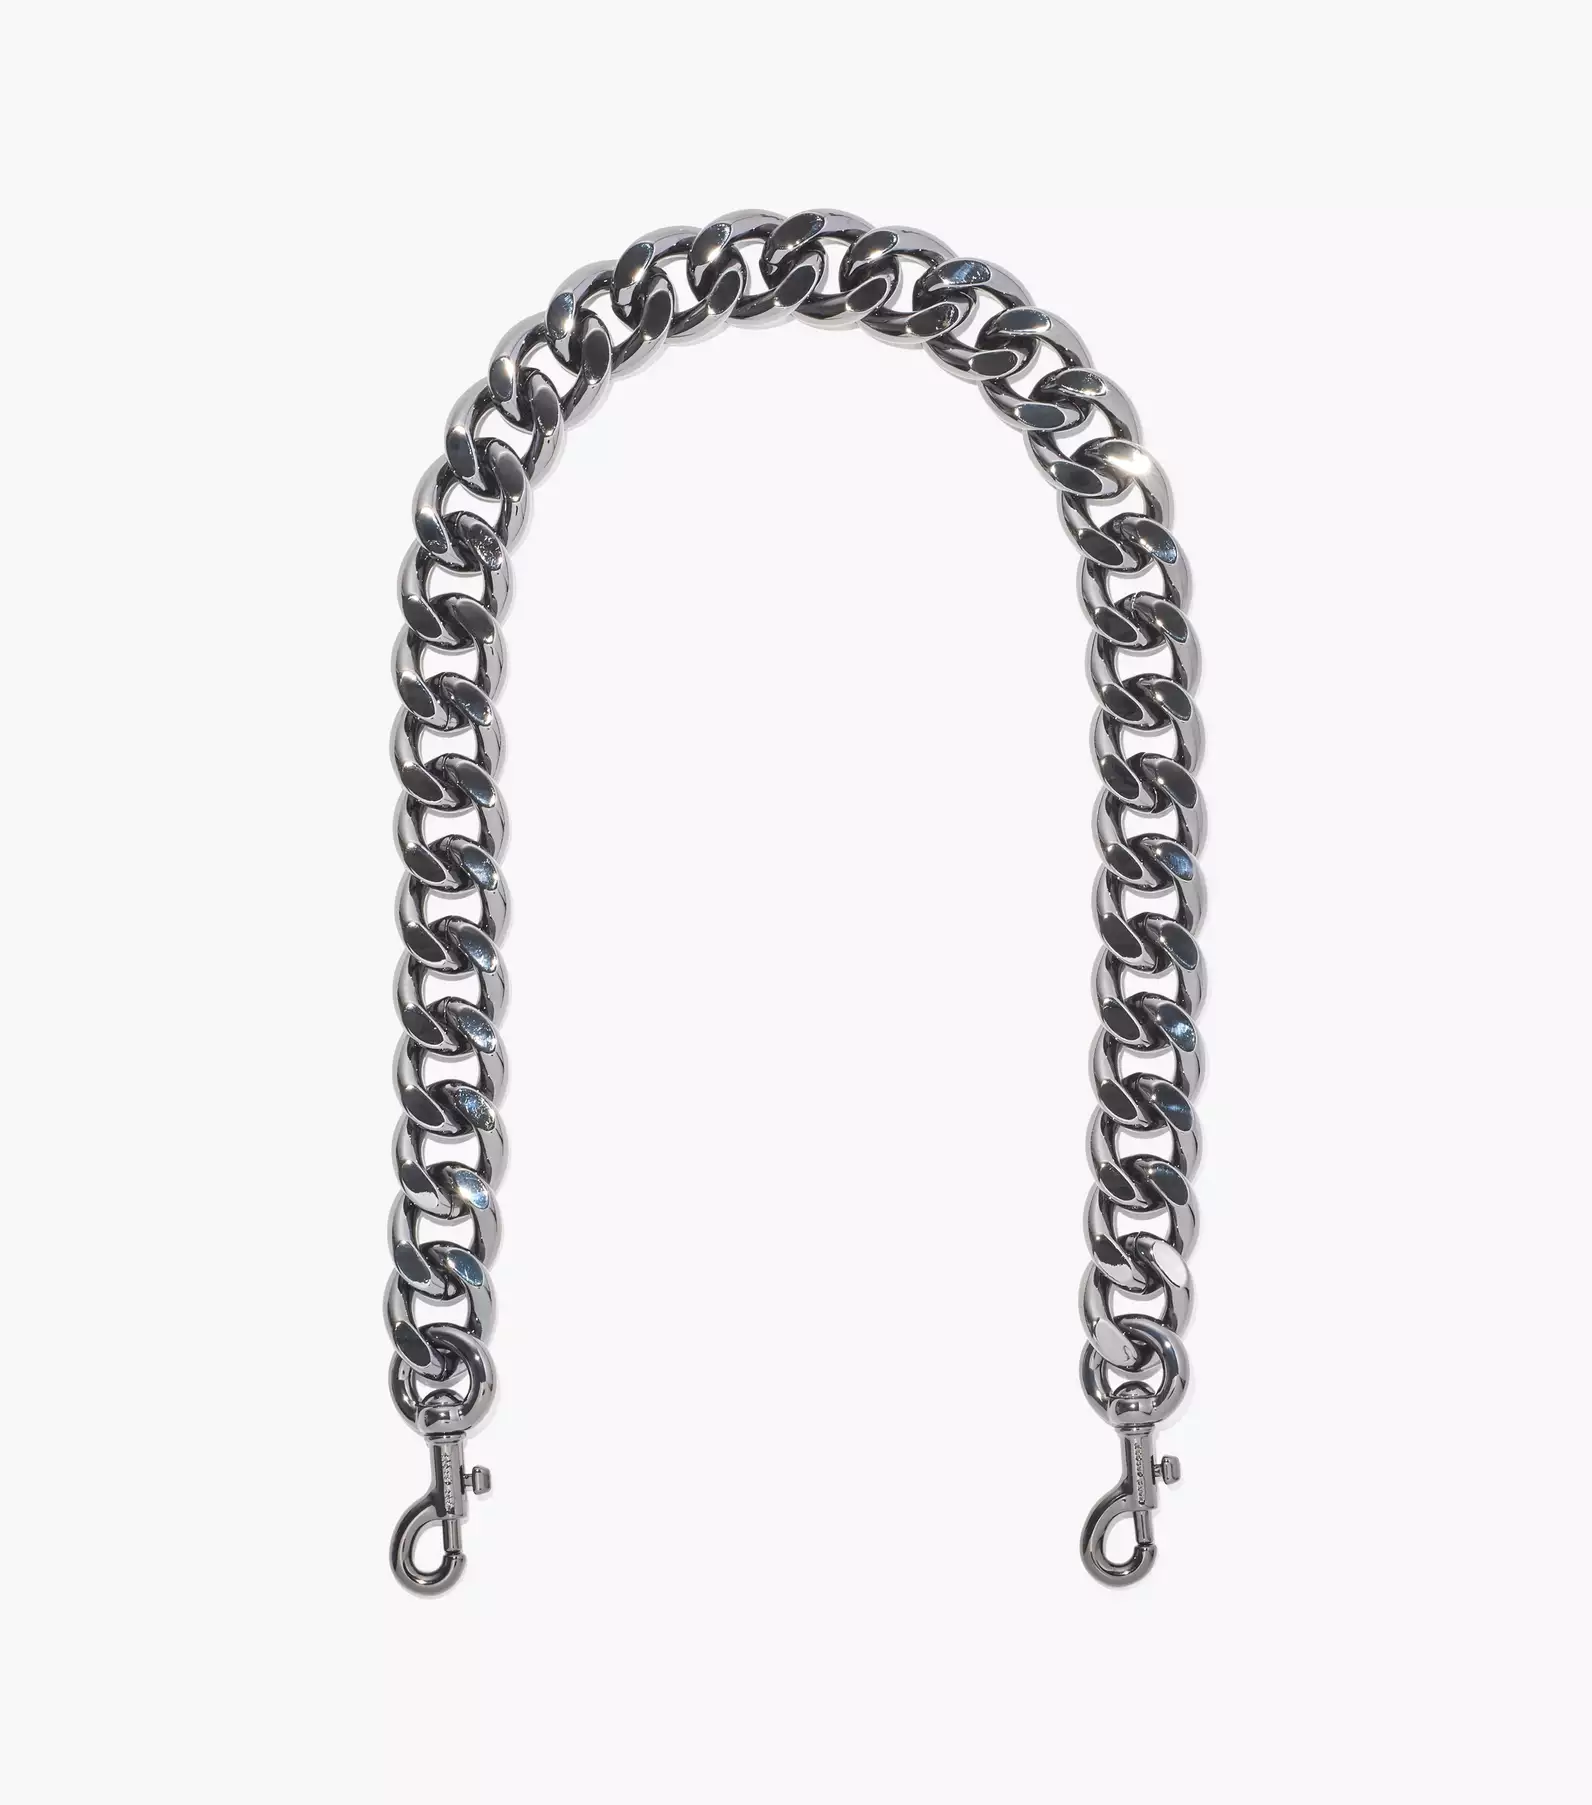 The Chainlink Shoulder Strap(Straps and Charms)